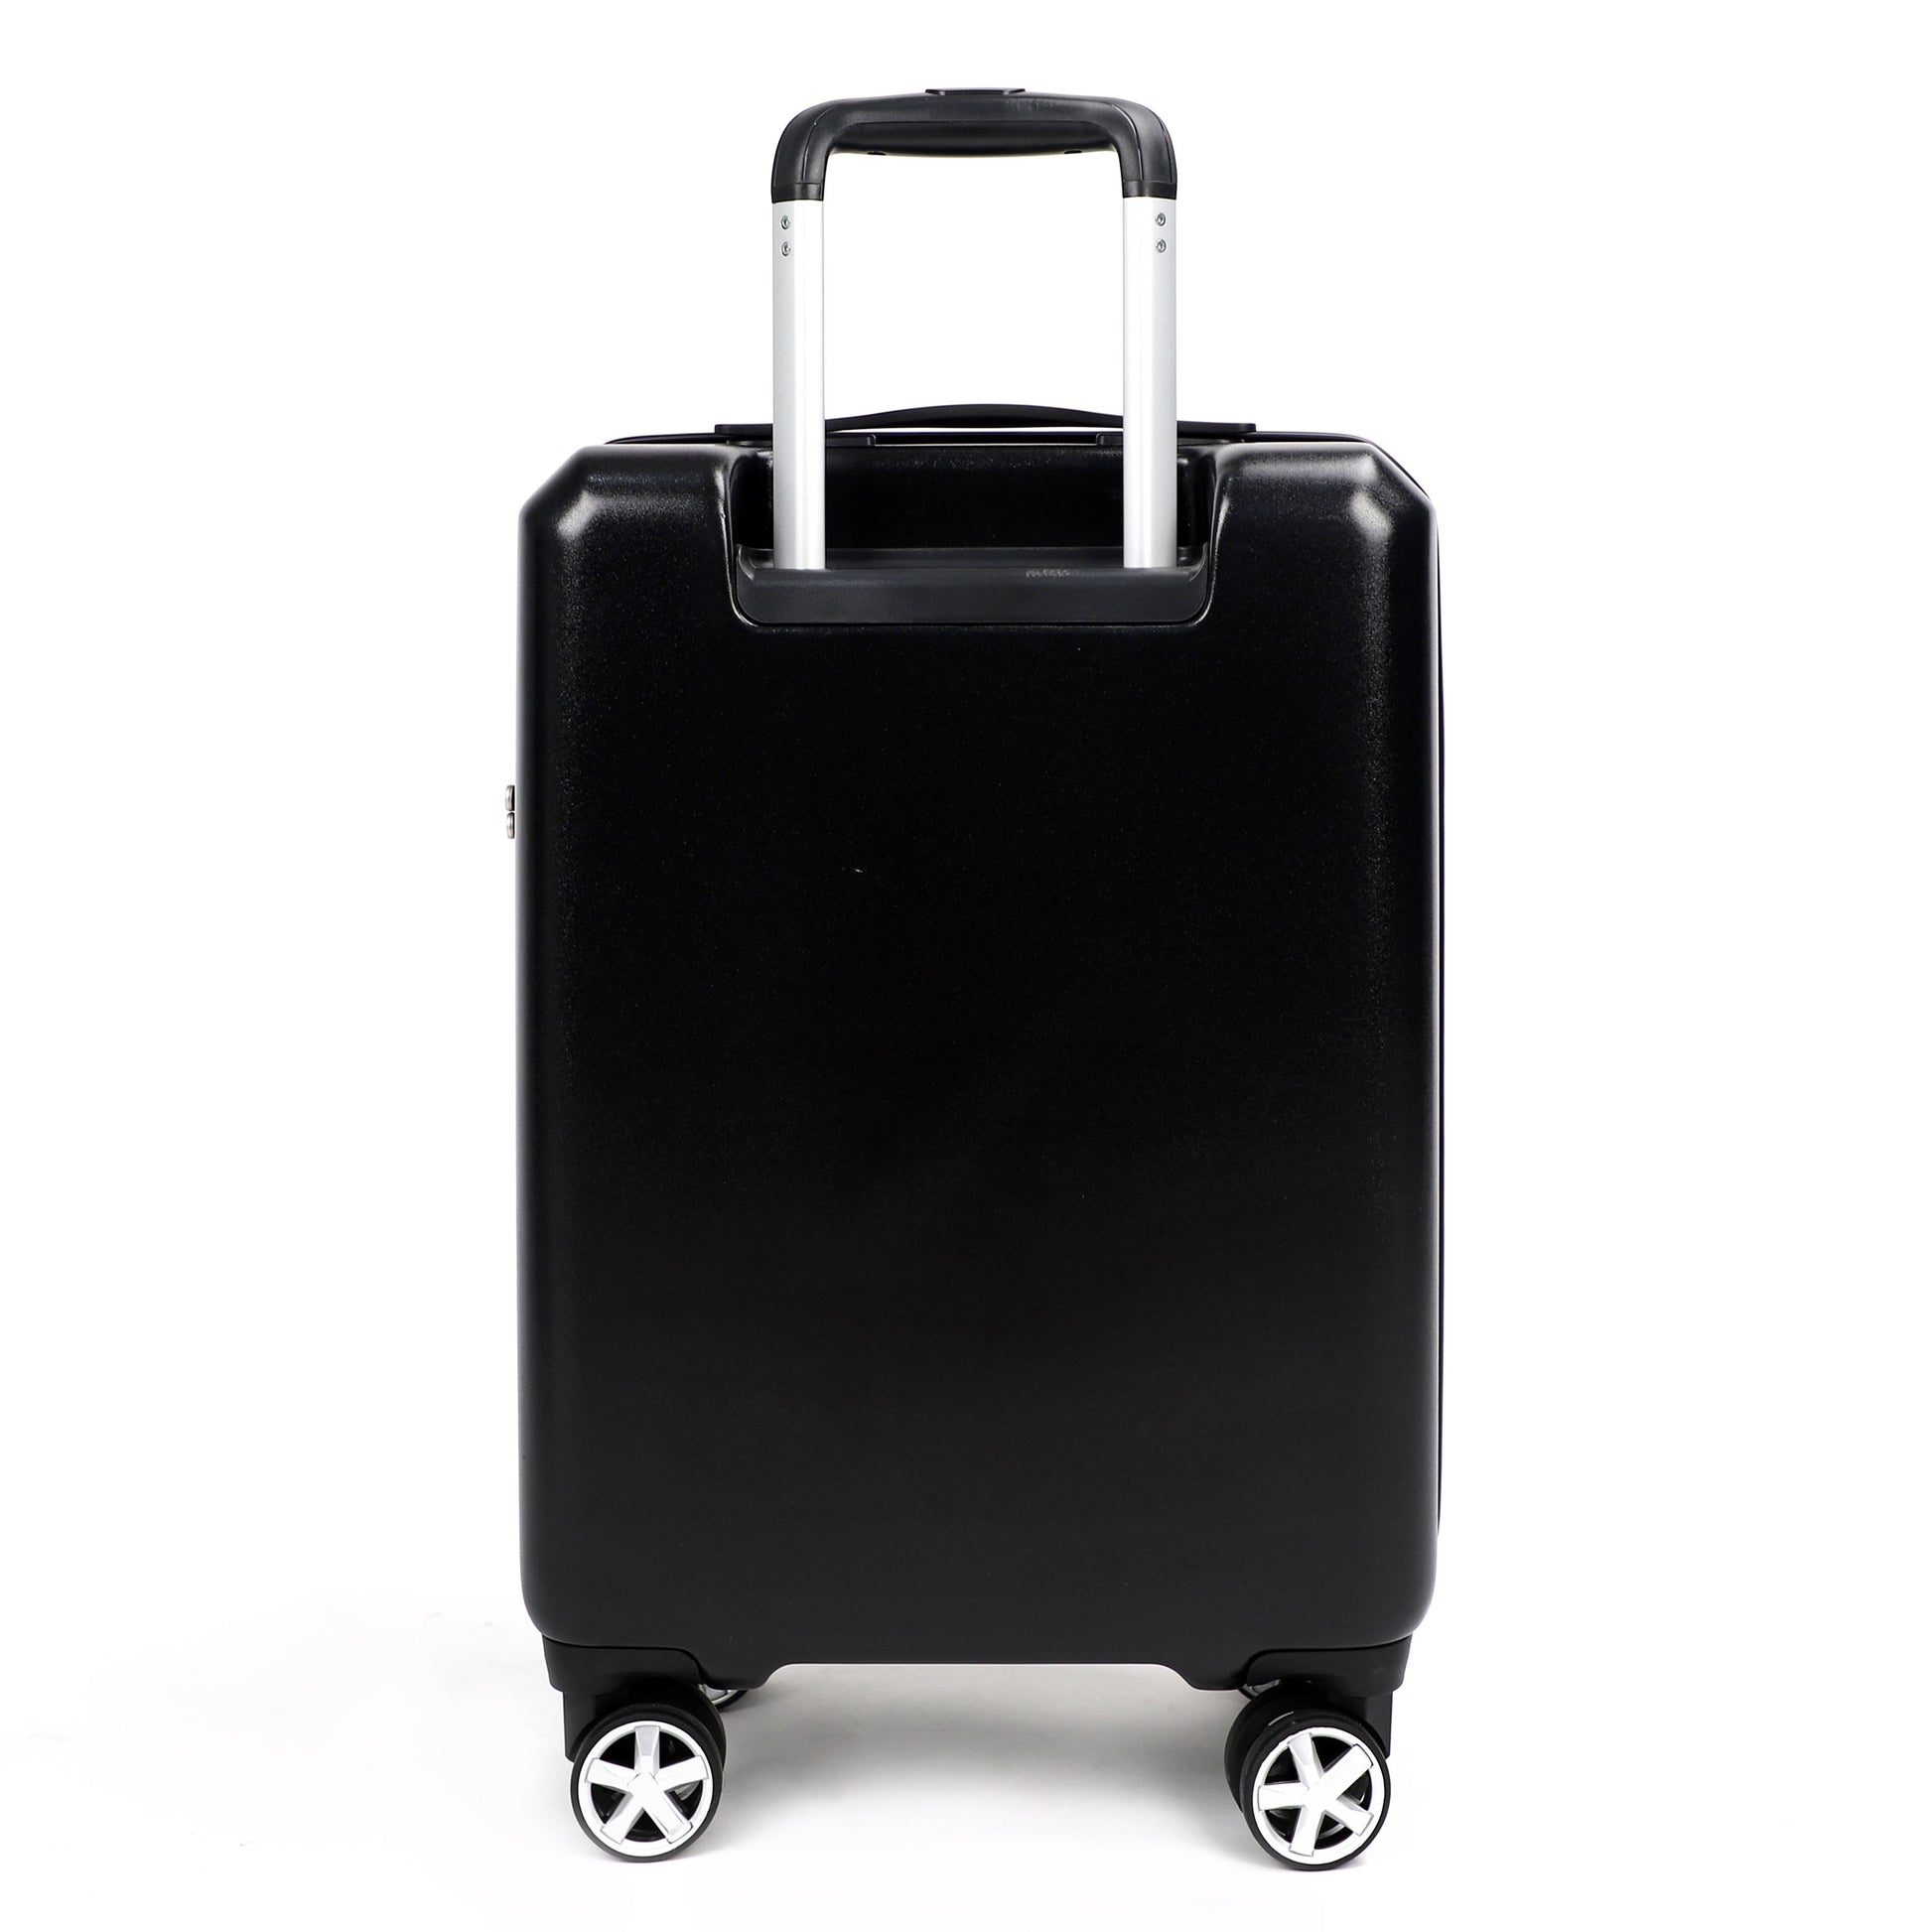 Airline_Carry_On_Luggage_Black_rear_view_T1978155001